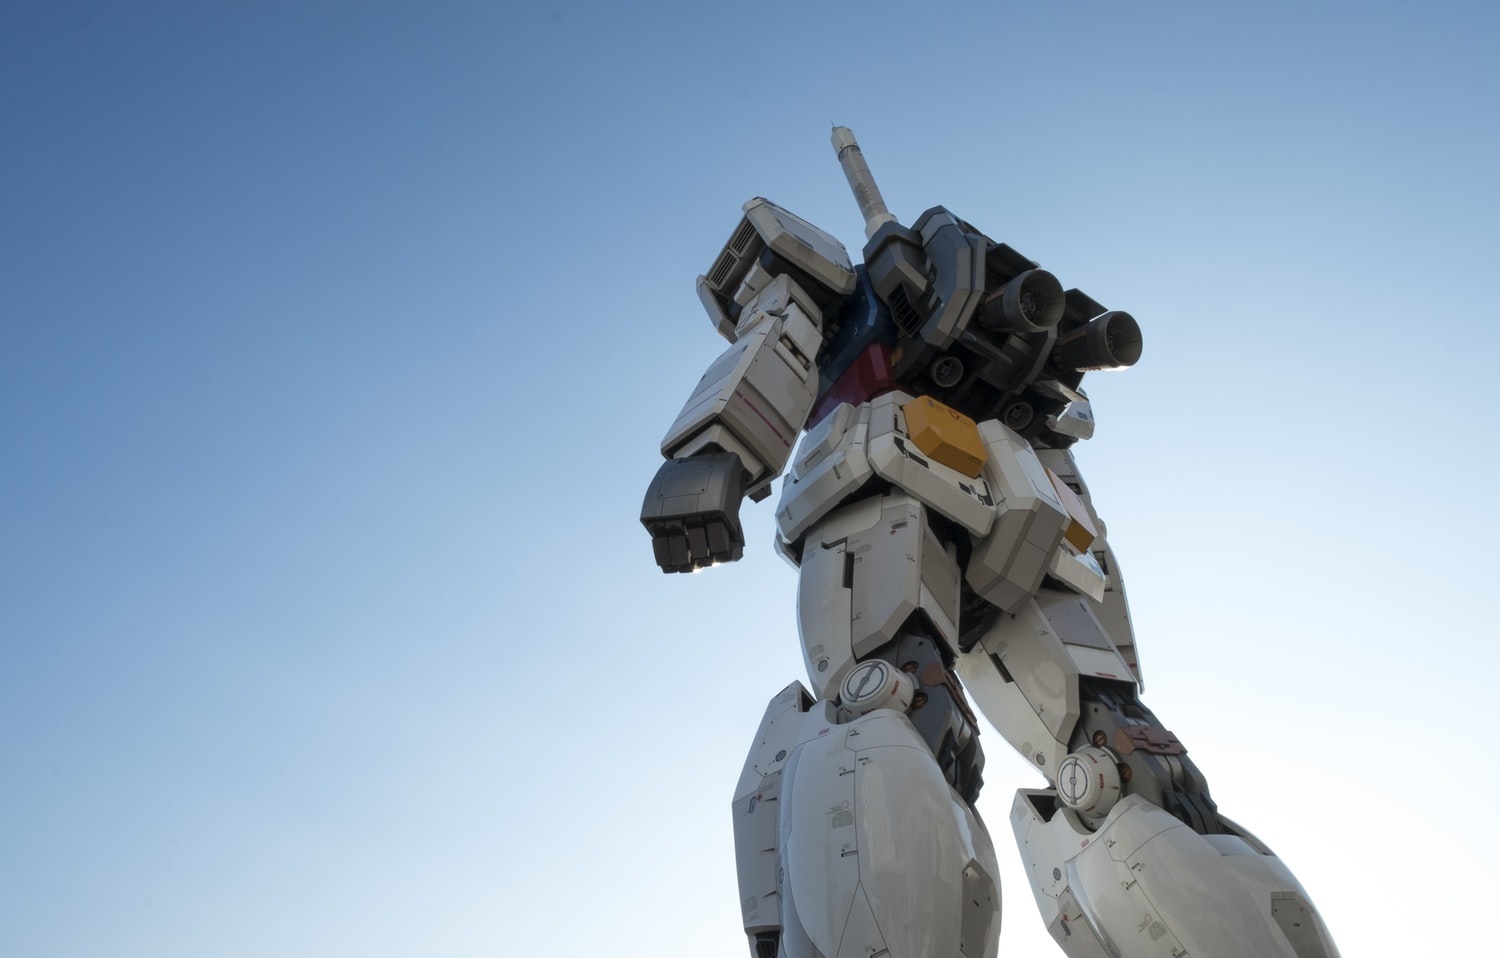 Low angle shot of a robot against a blue sky.